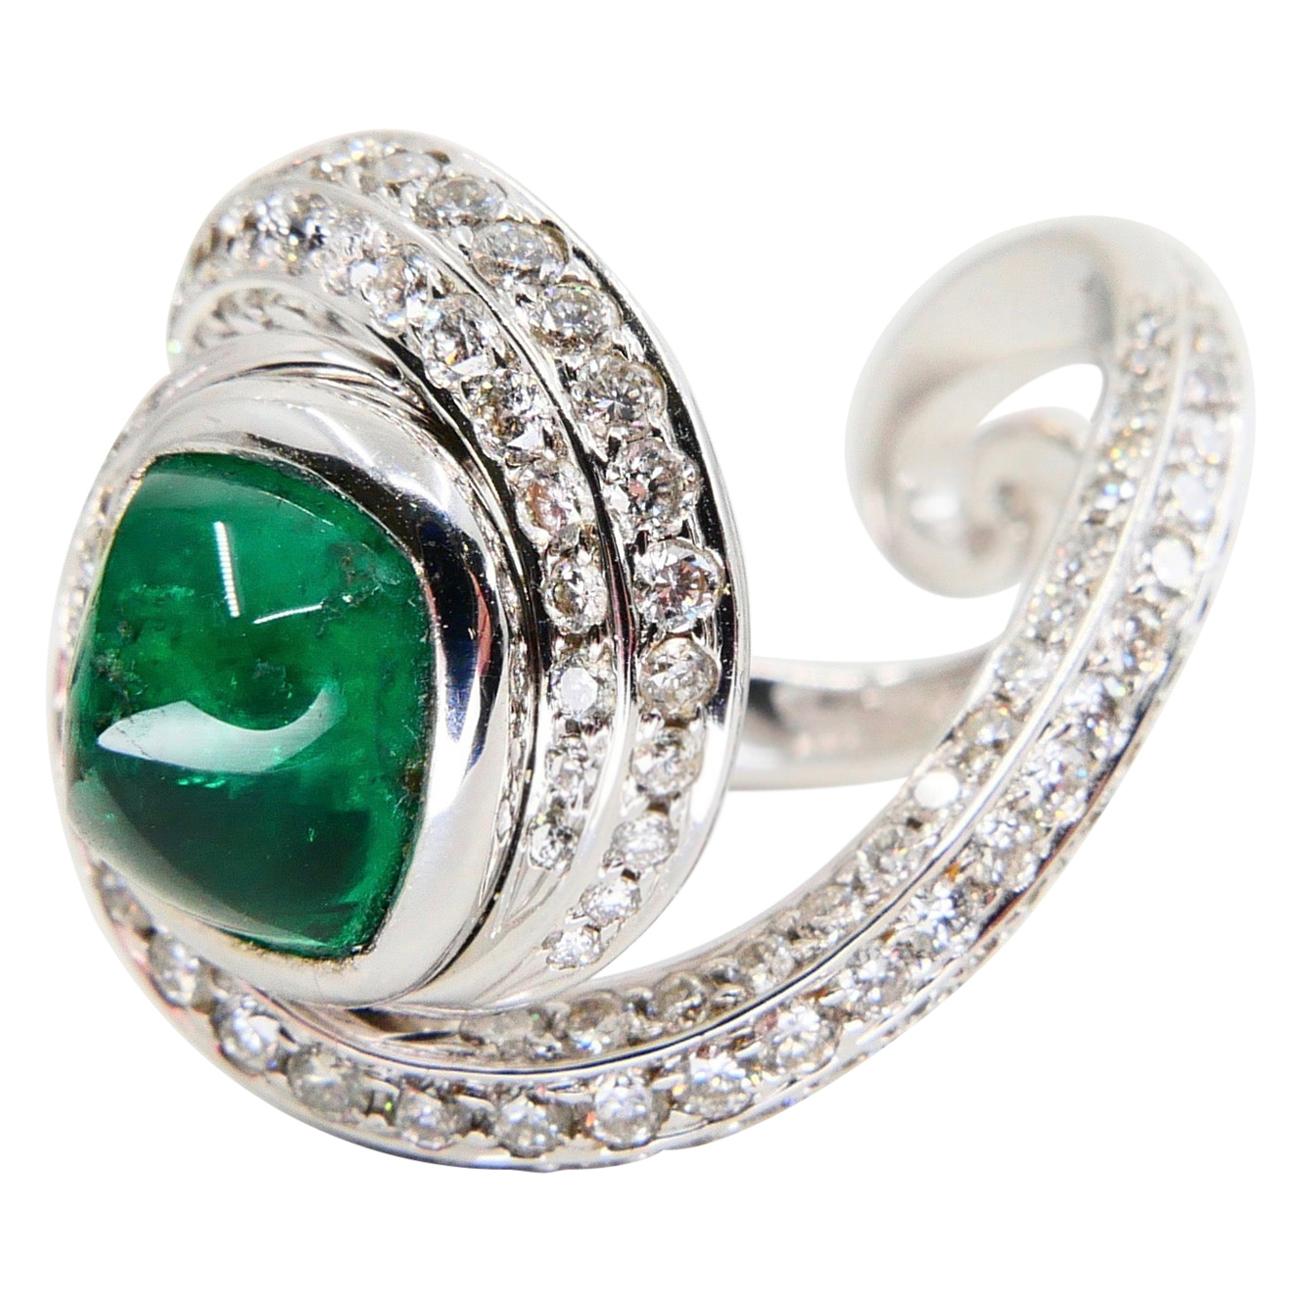 Contemporary Sugerloaf Emerald 2.07 Carat and Diamond Cocktail Ring, 18 Karat White Gold